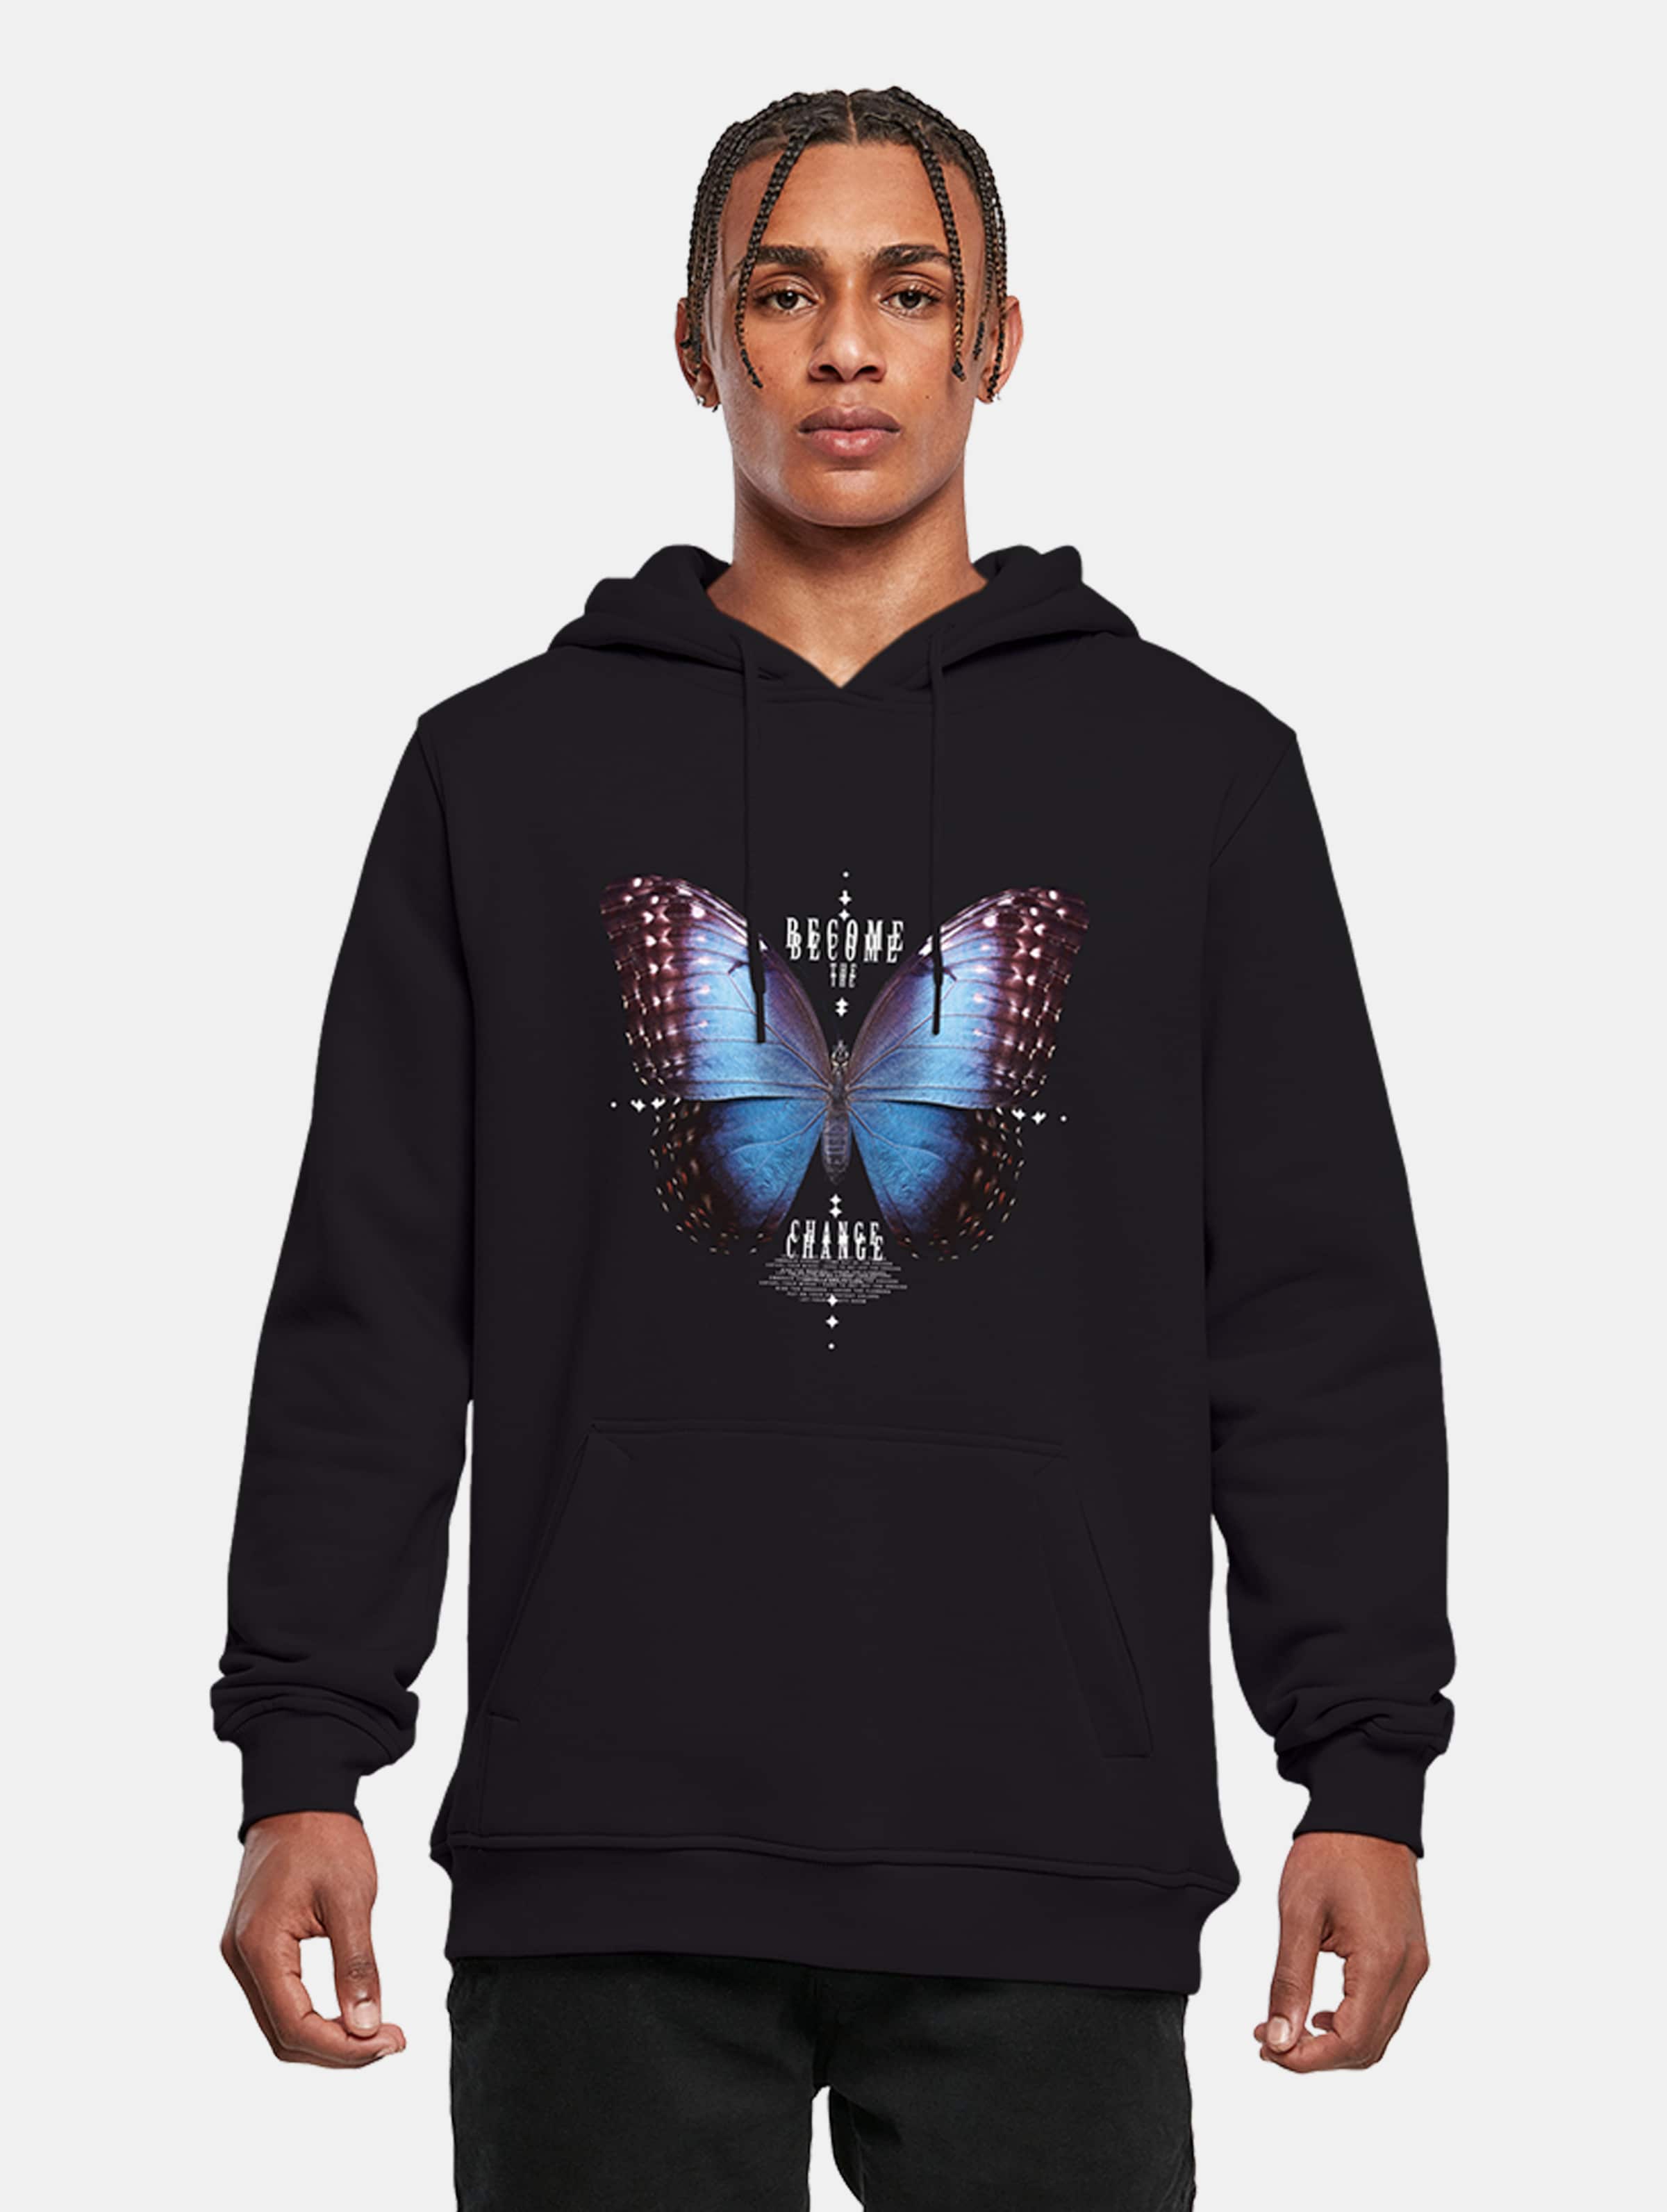 Mister Tee - Become The Change Butterfly Hoodie/trui - M - Zwart